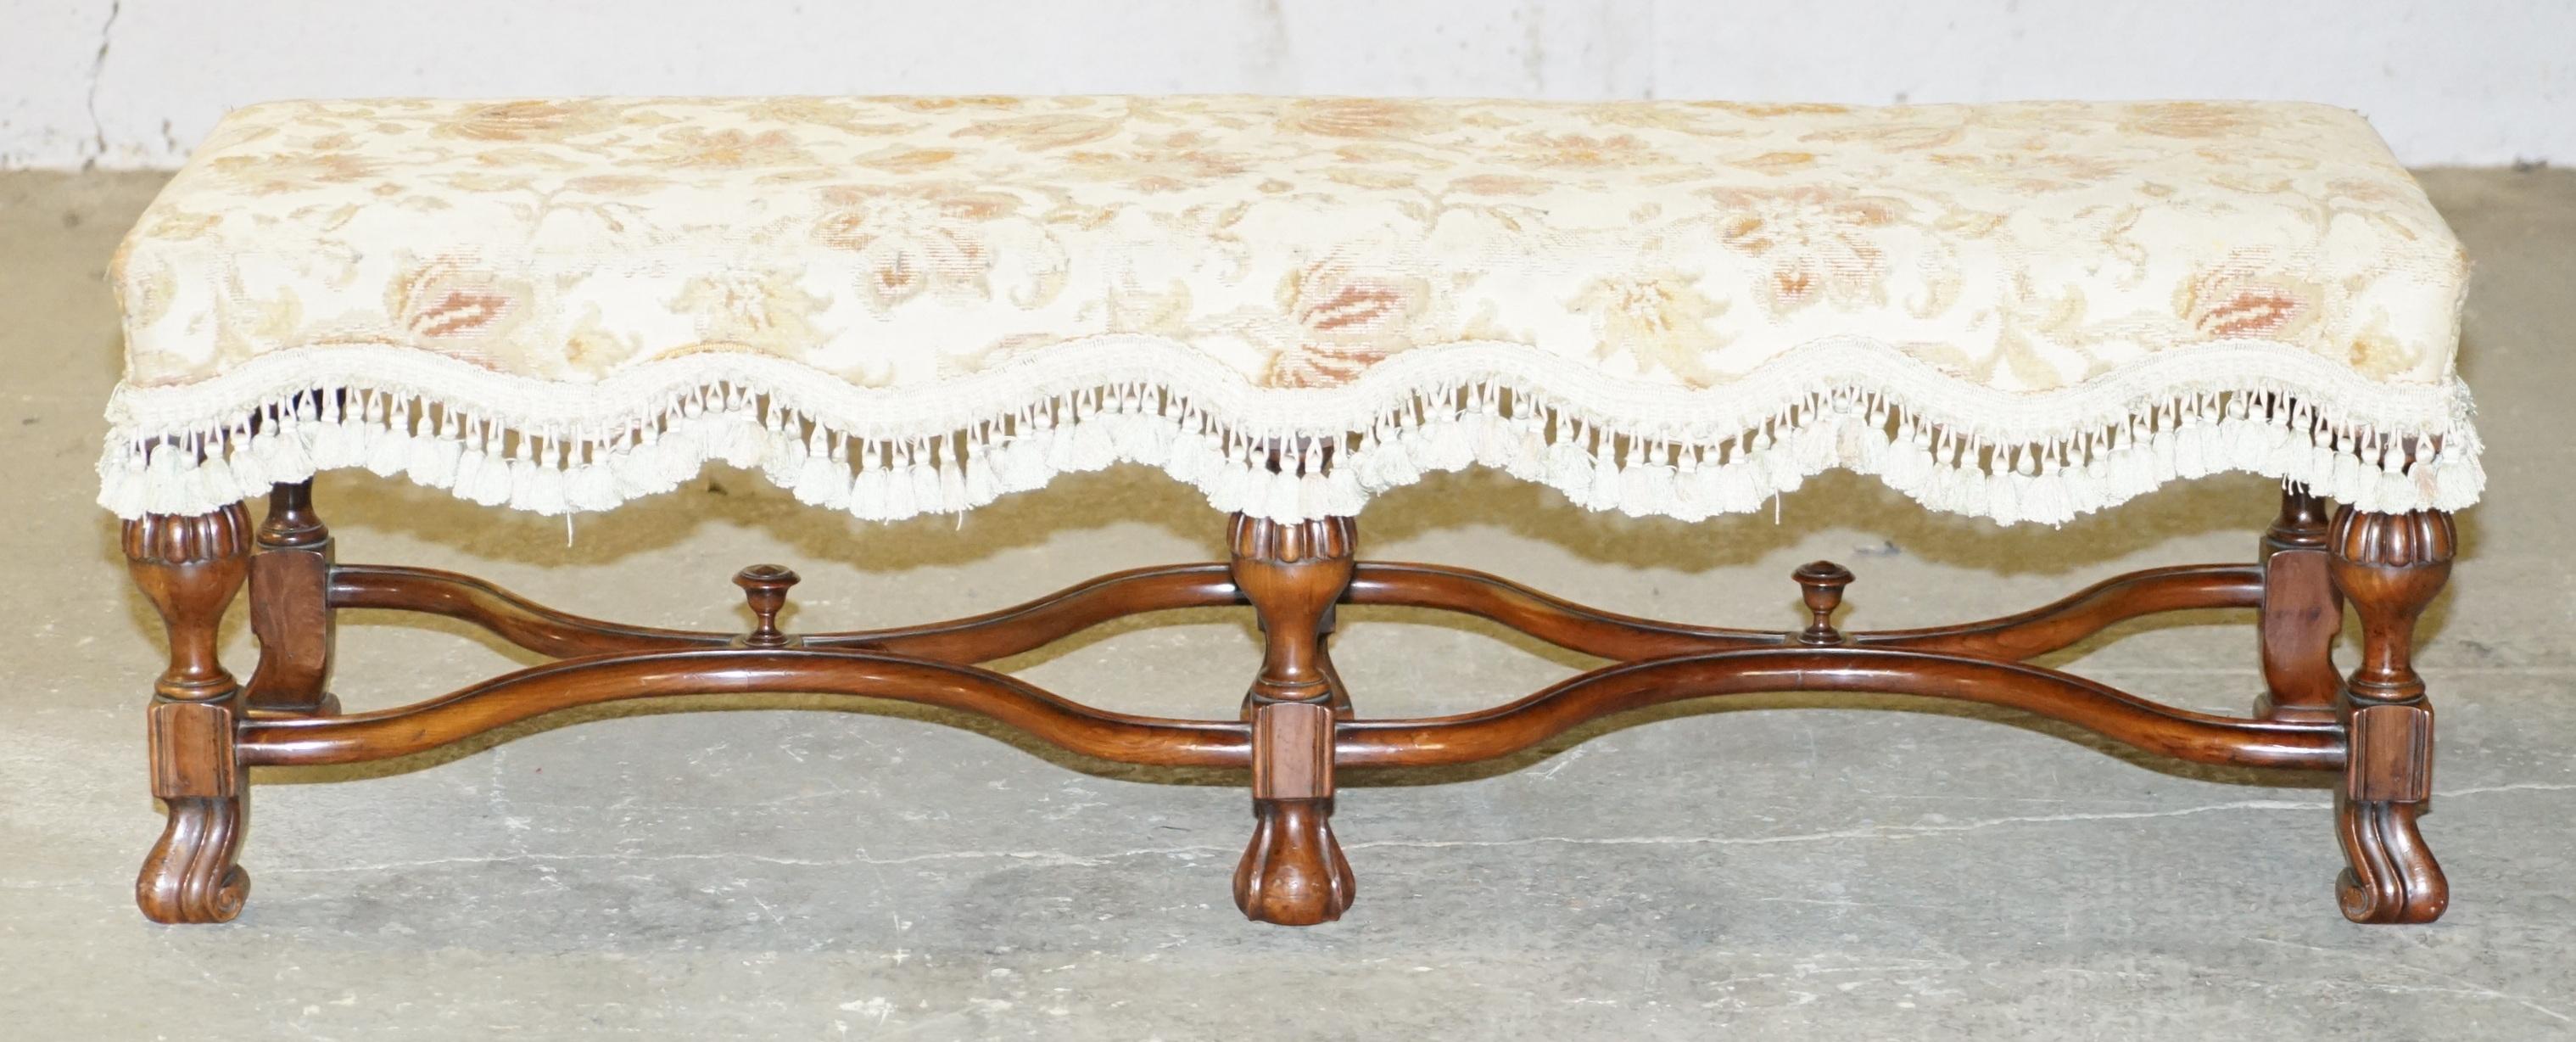 We are delighted to this lovely circa 1900 William & Mary style long two person footstool bench

A very decorative stool, ideally suited for two people to share, the timber frame is a real tour de force or antique English style and design

We